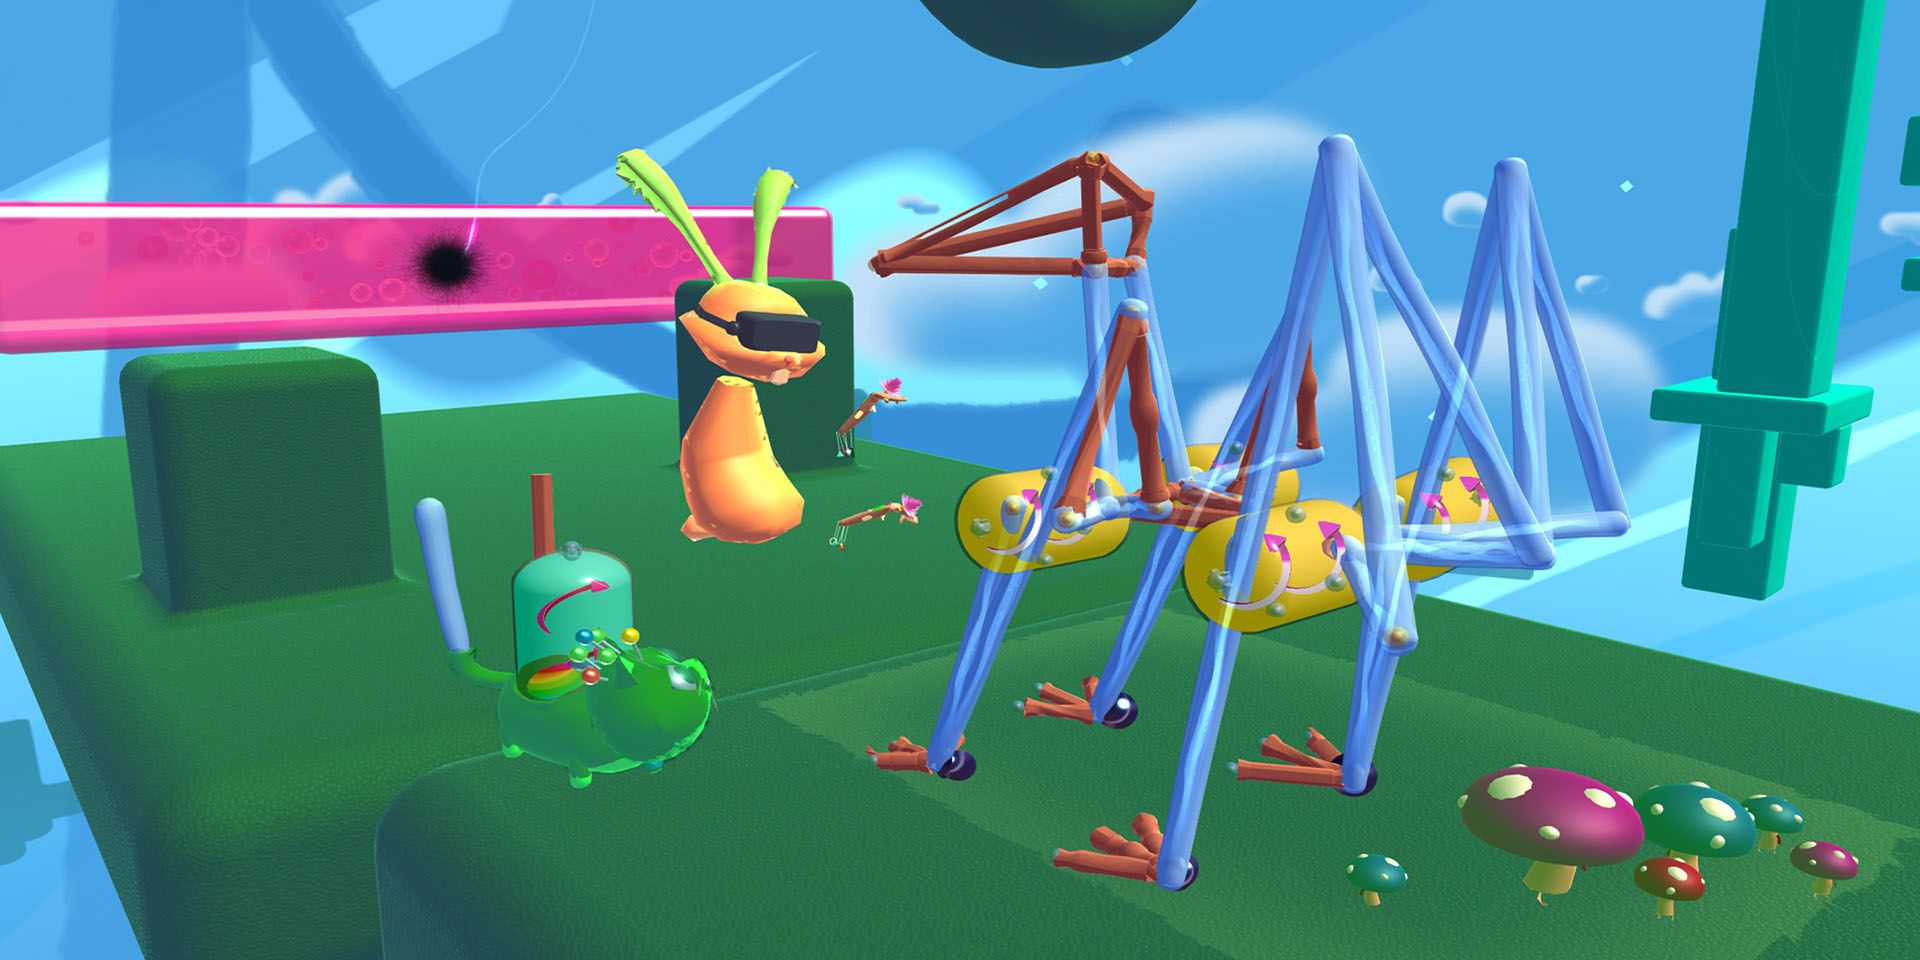 Fantastic Contraptions promo image showing a VR bunny character creating a strange four-legged vehicle in a jelly-like world